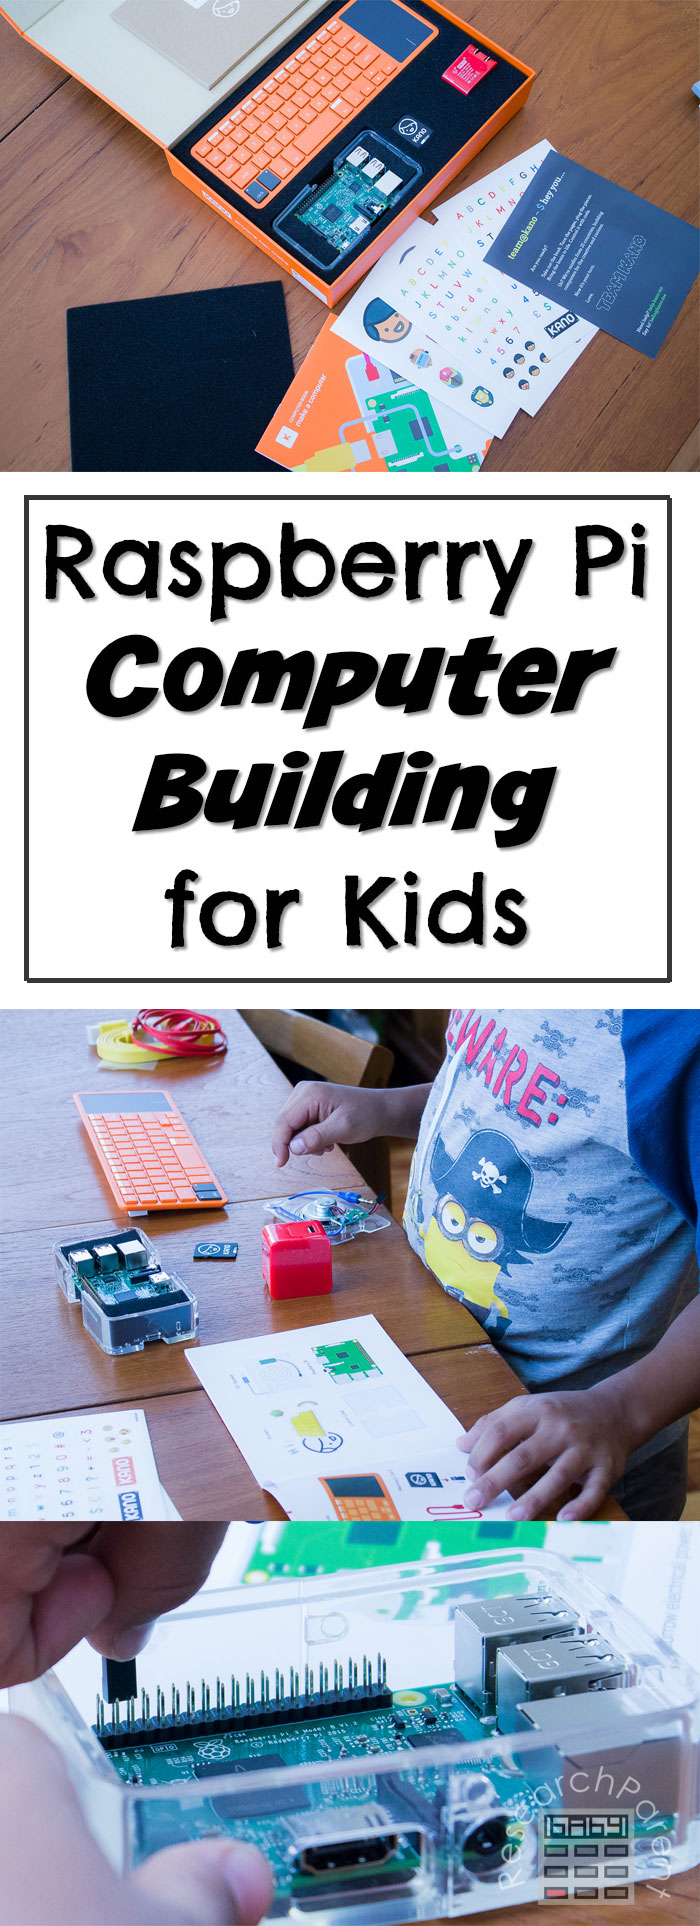 Raspberry Pi Computer Building for Kids